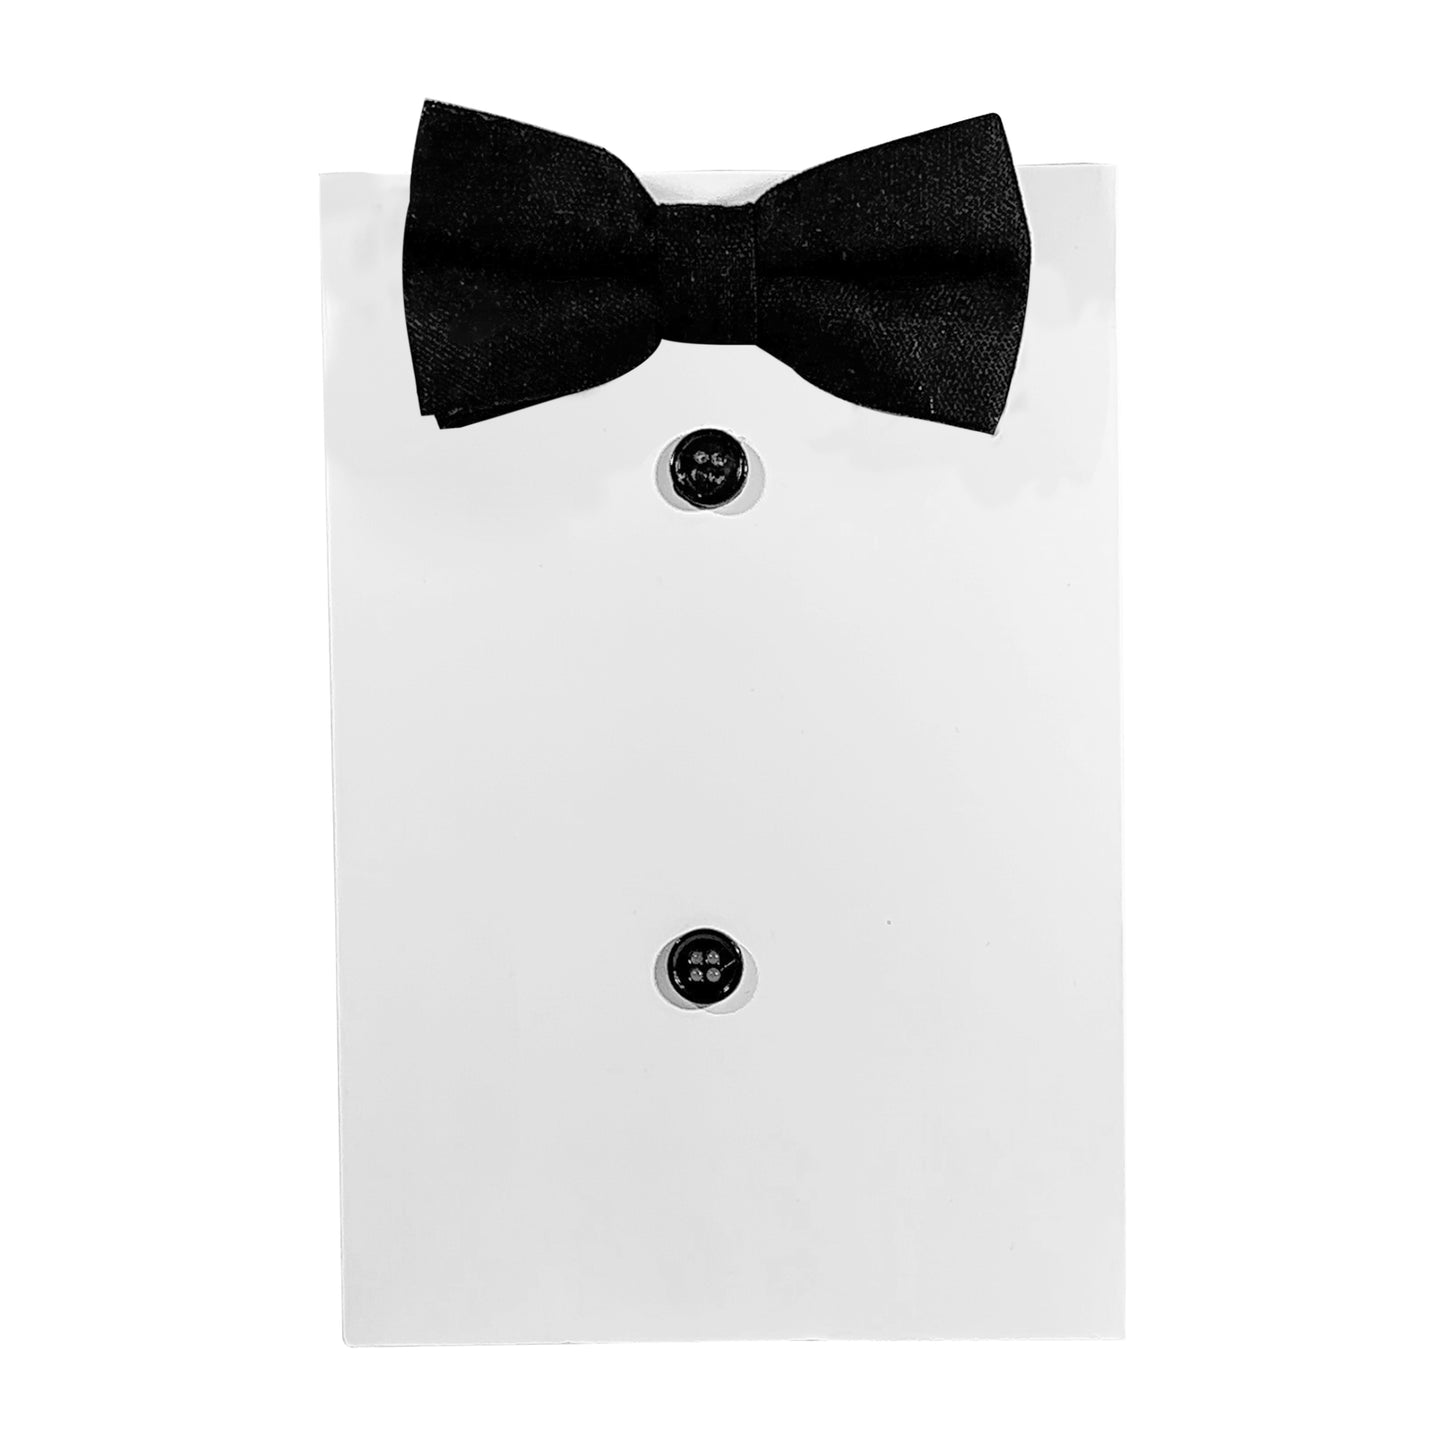 After 5 Bow Tie Gift Bag Collection